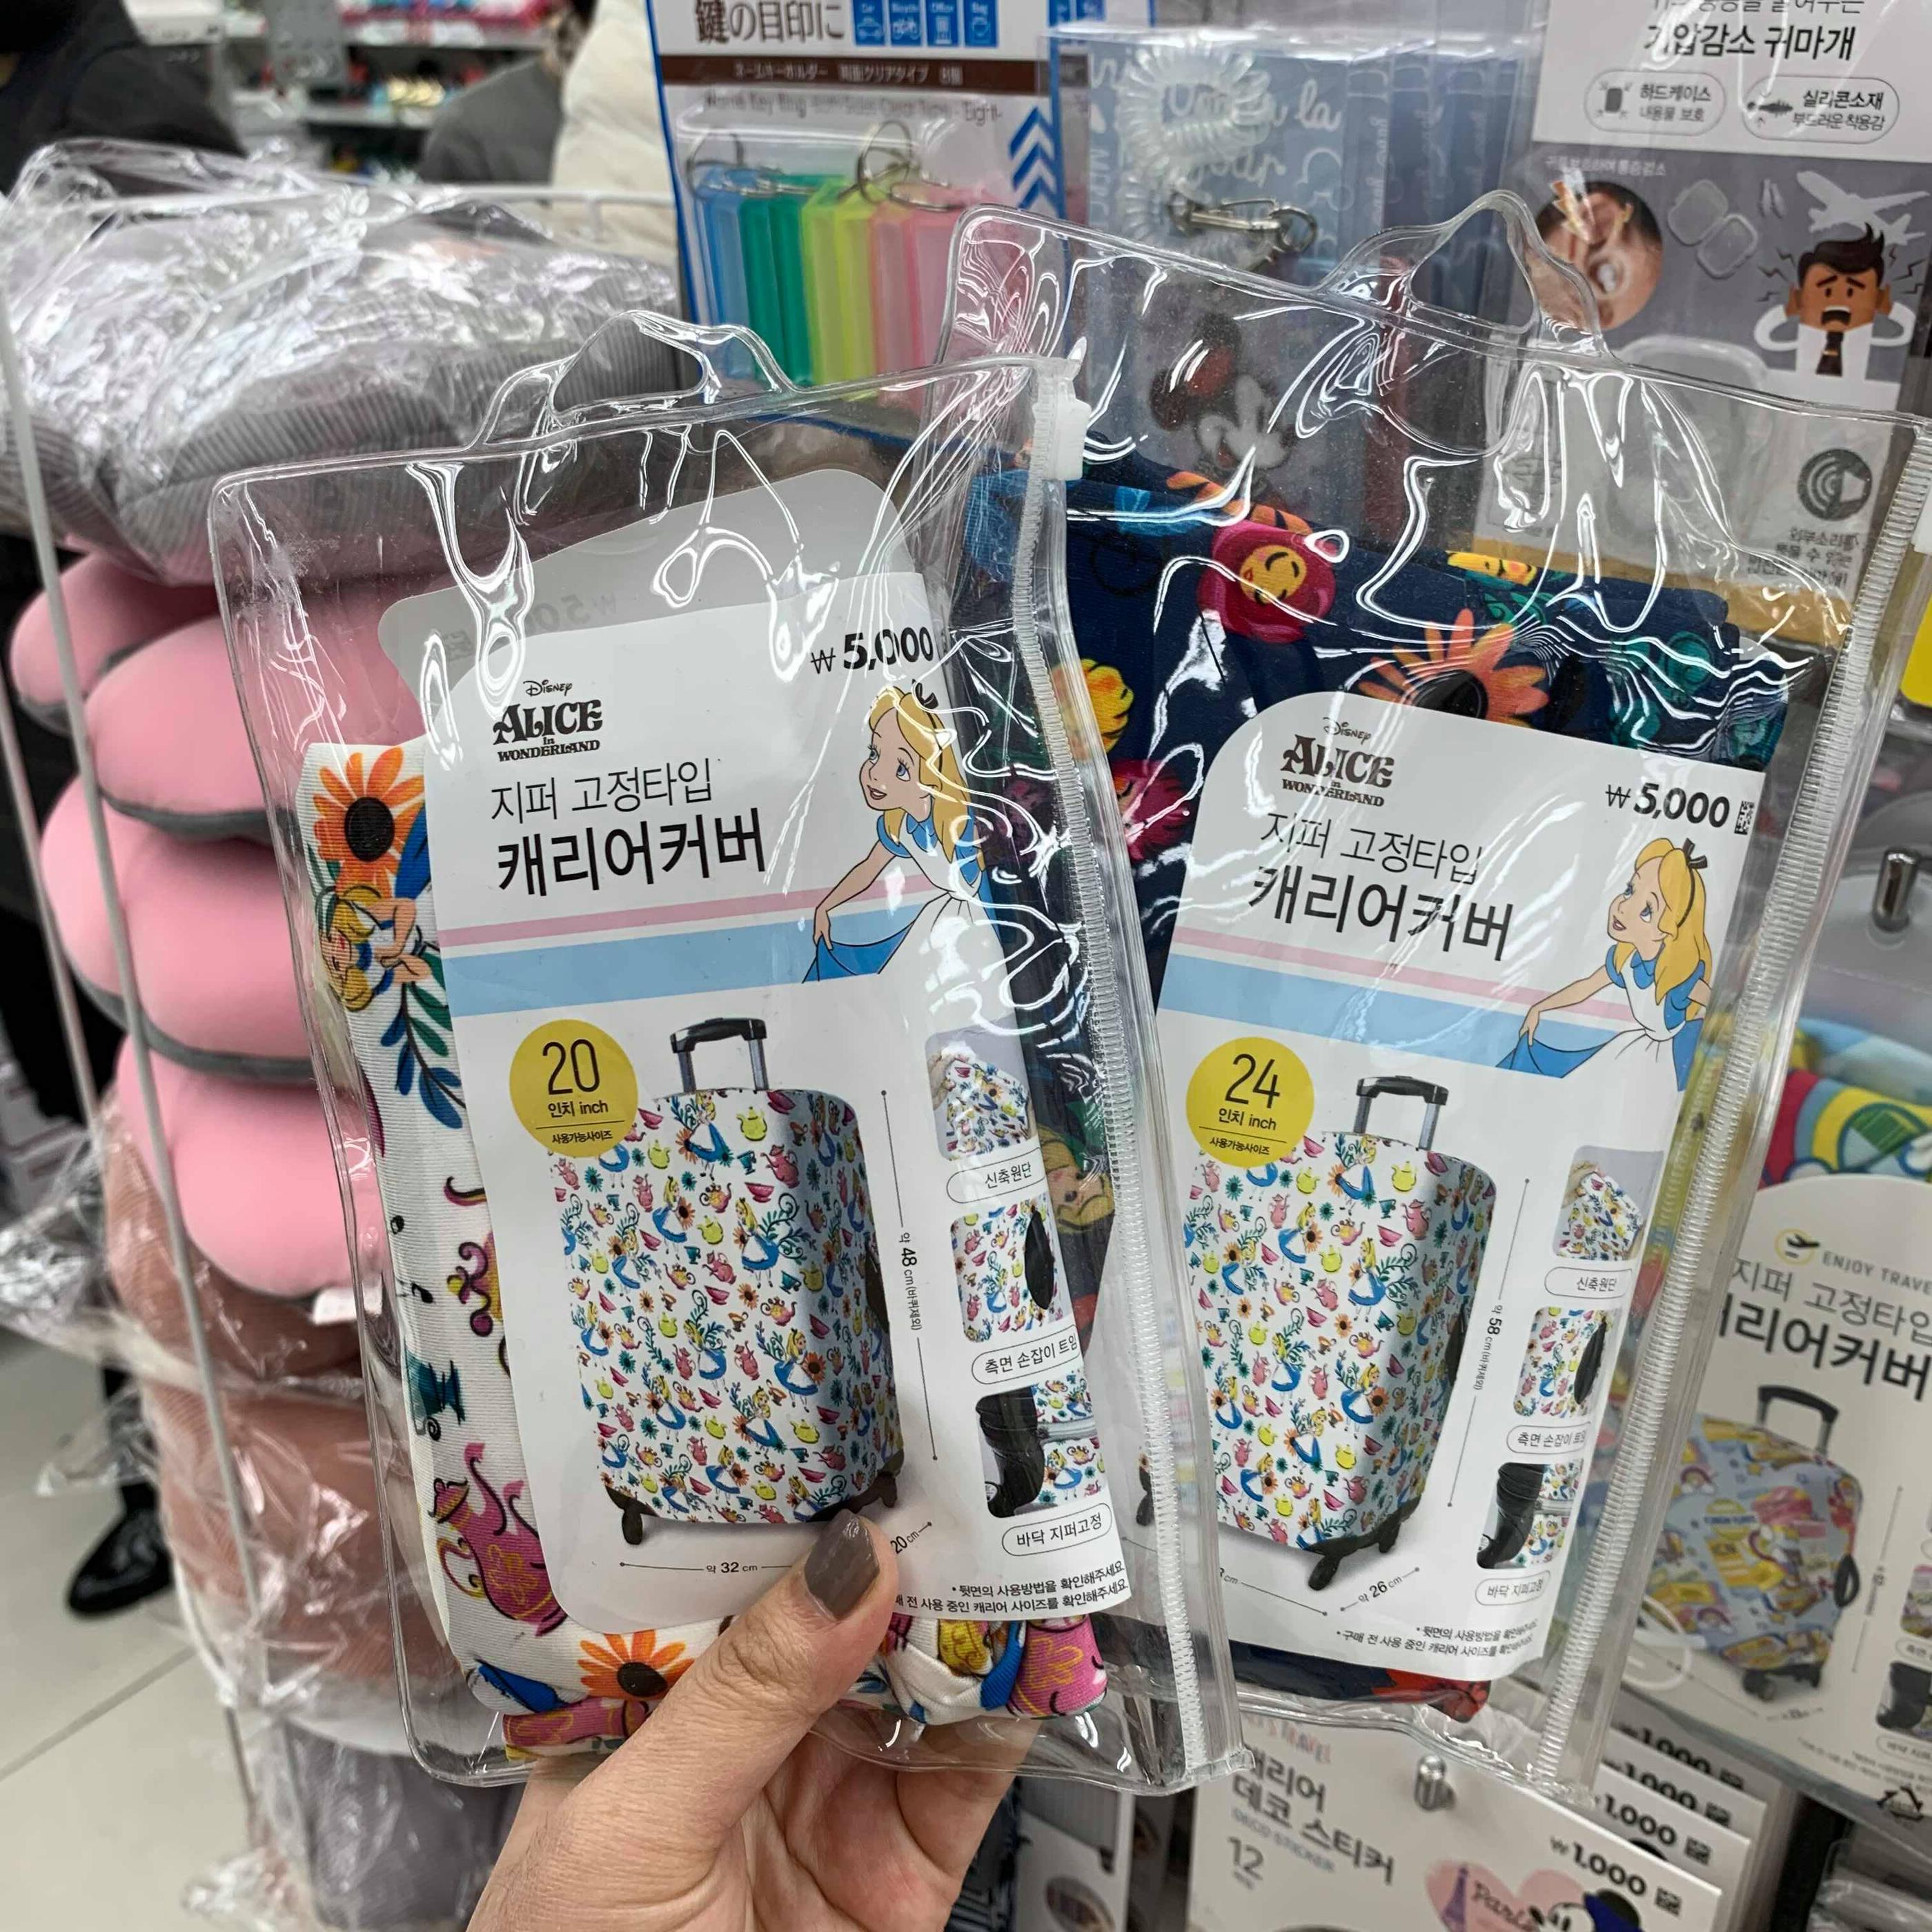 Visit Daiso for items you've forgot to bring. Top 8 useful travel items in Daiso!